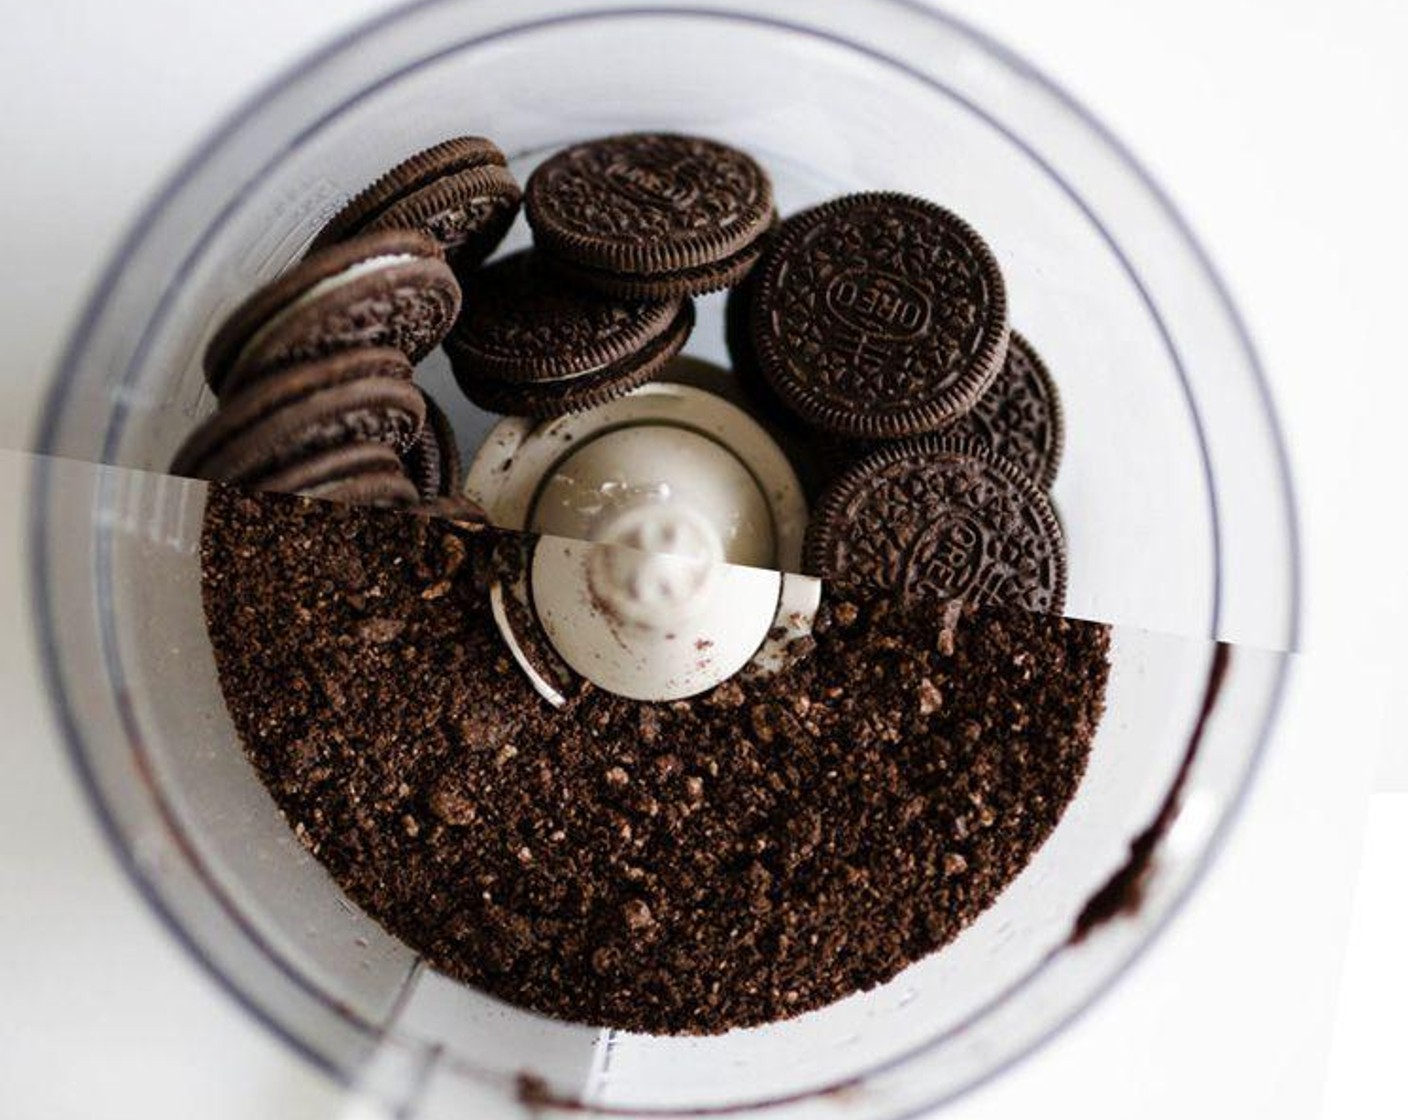 step 1 In a food processor, blitz the Oreo® Chocolate Sandwich Cookies (20) into coarse crumbs. Mix with Butter (1/4 cup) and press into the bottom of a pie pan or parchment paper-lined springform pan. Set in fridge.